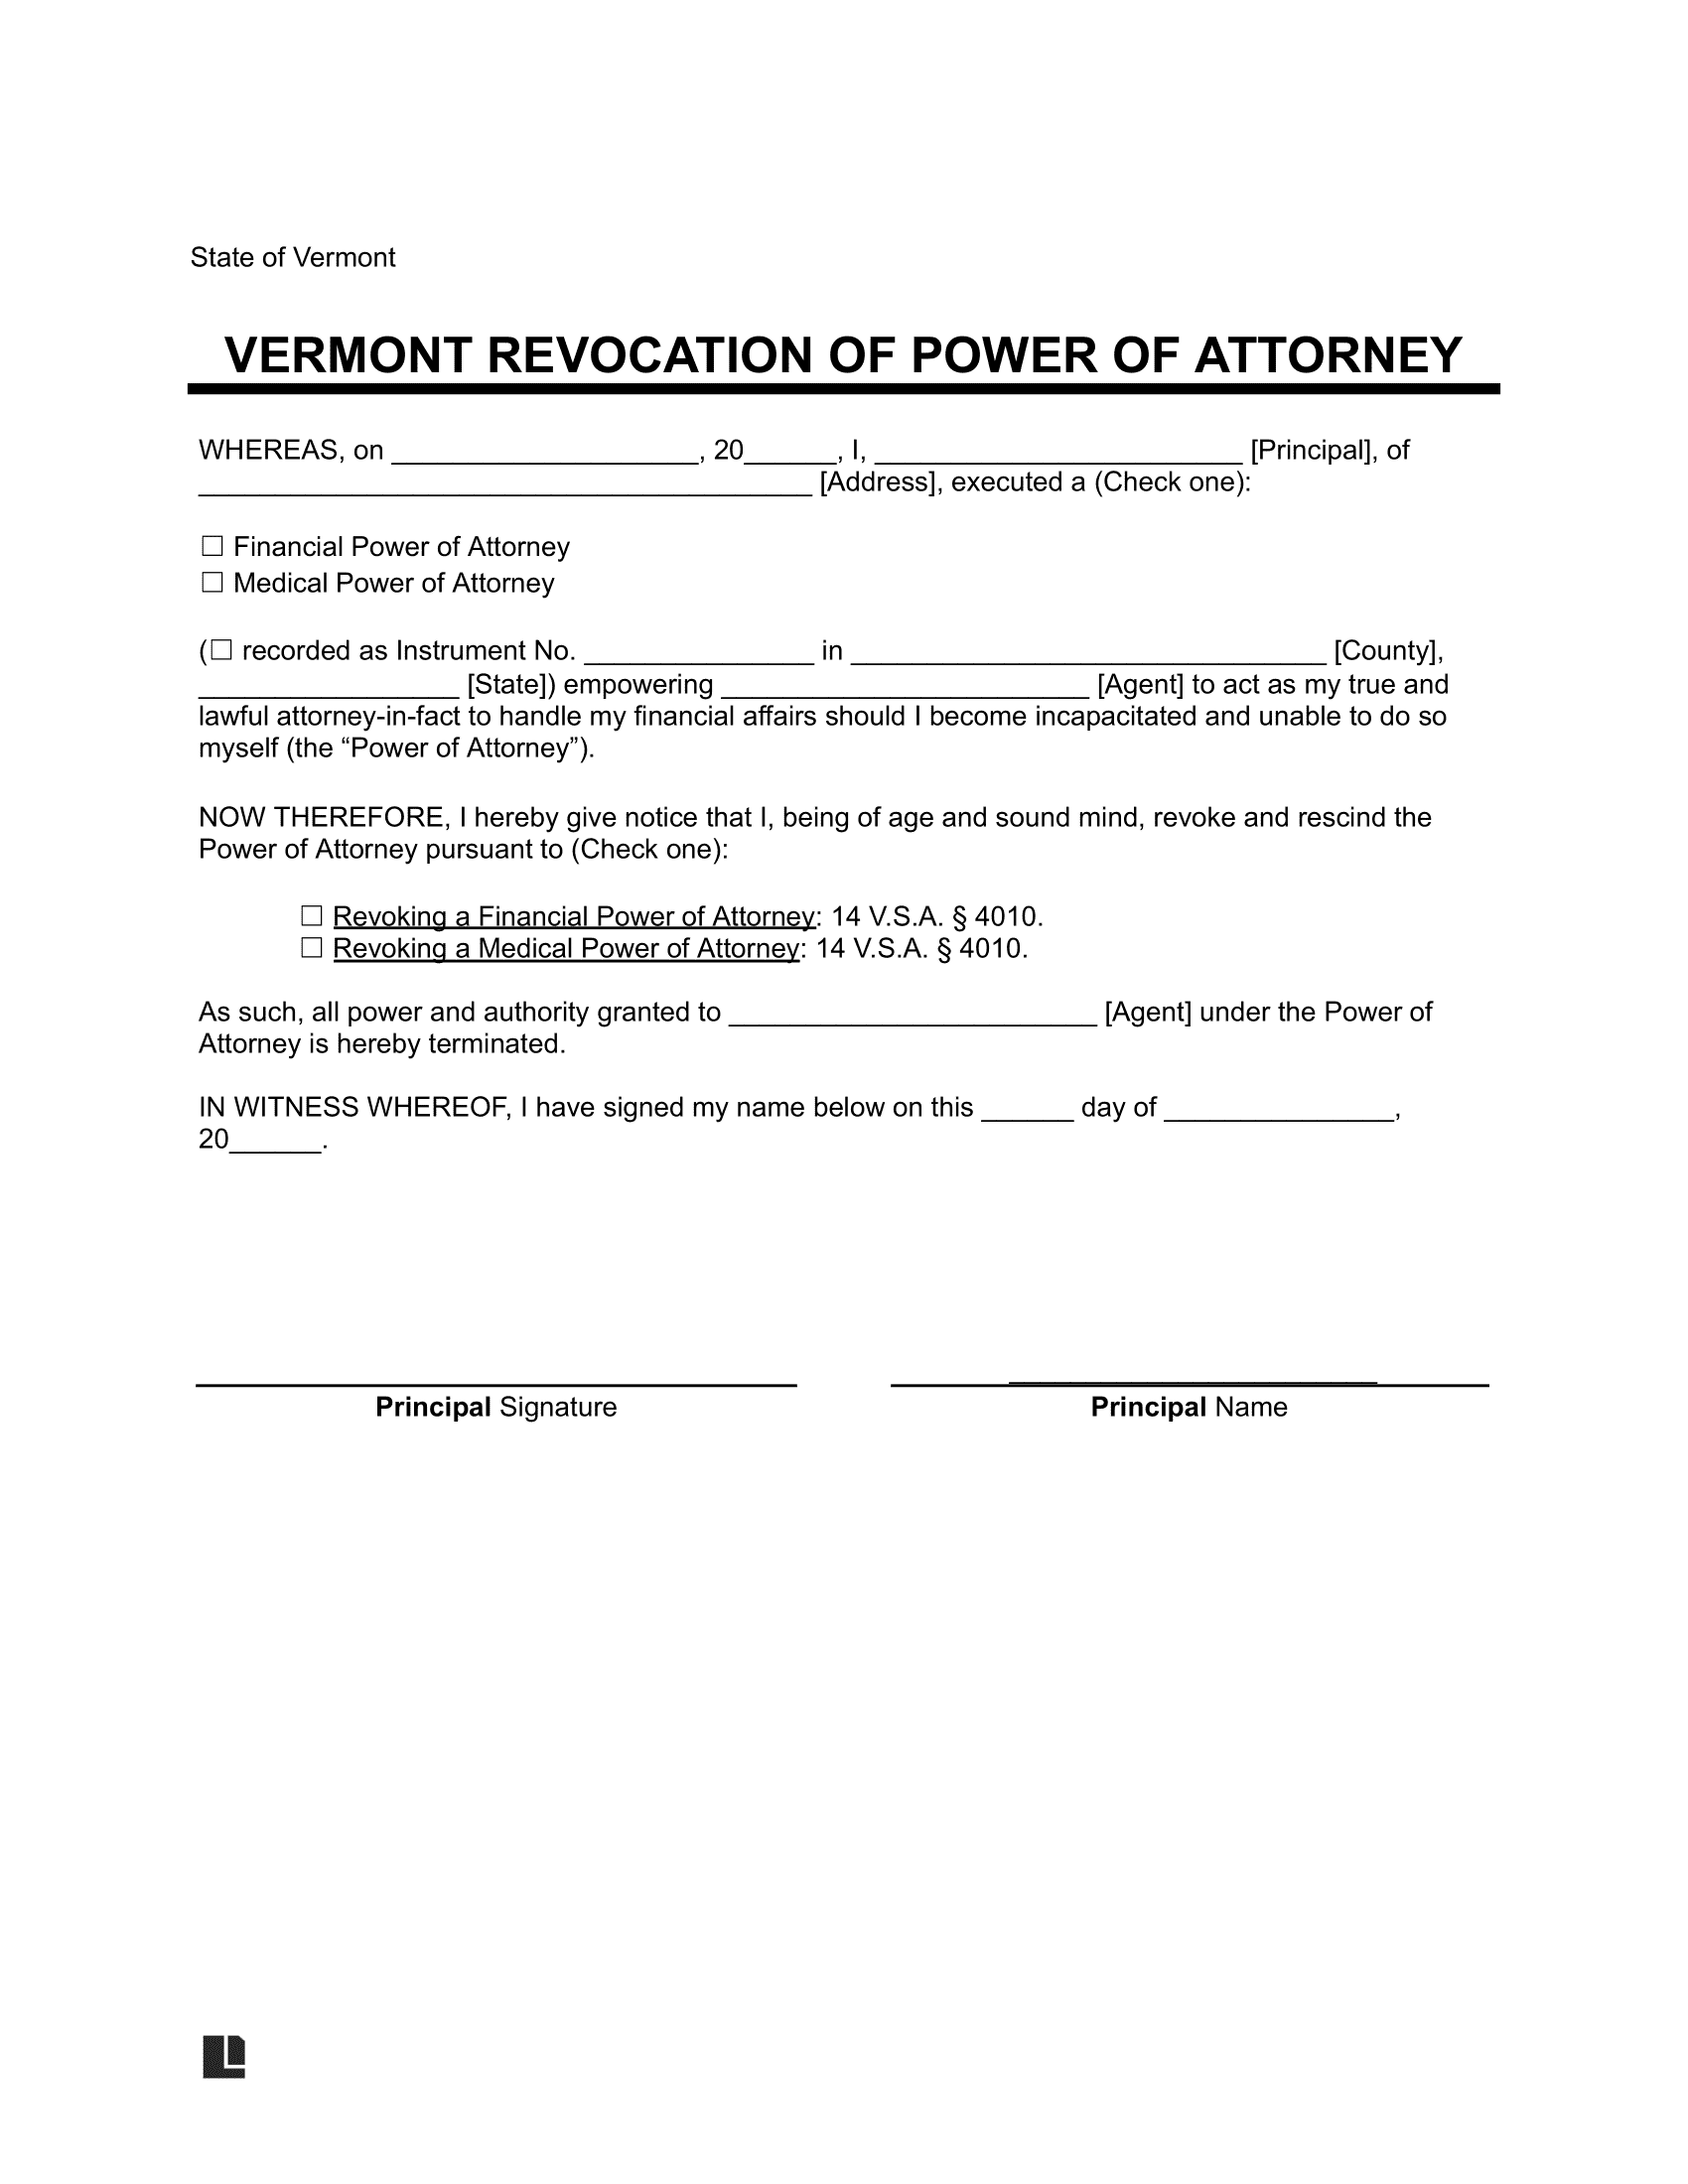 Vermont Revocation Power of Attorney Form